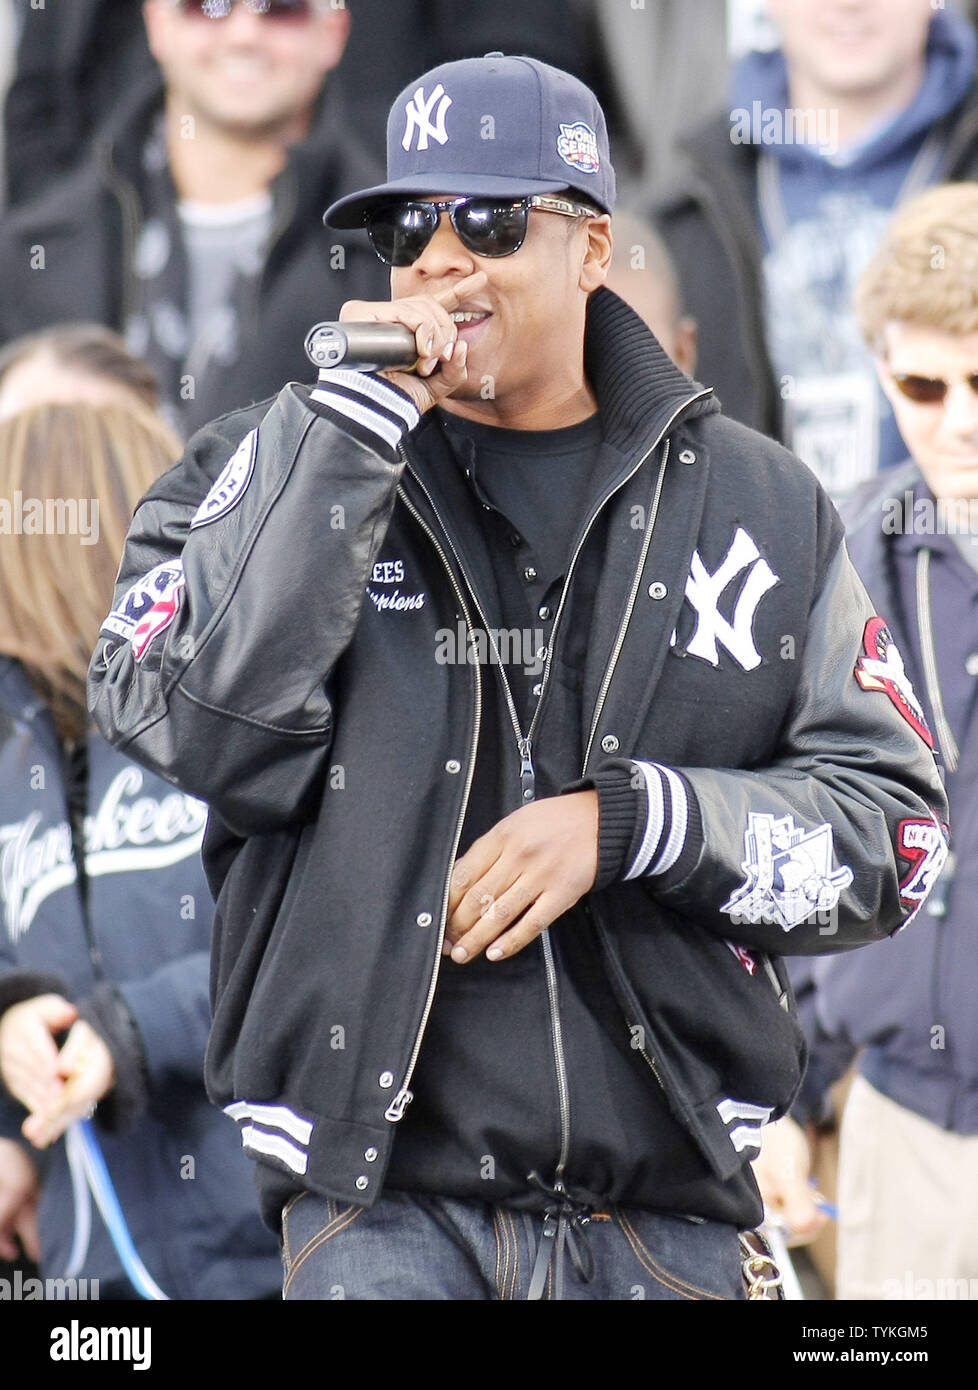 Jay Z performs at City Hall where the New York Yankees are honored